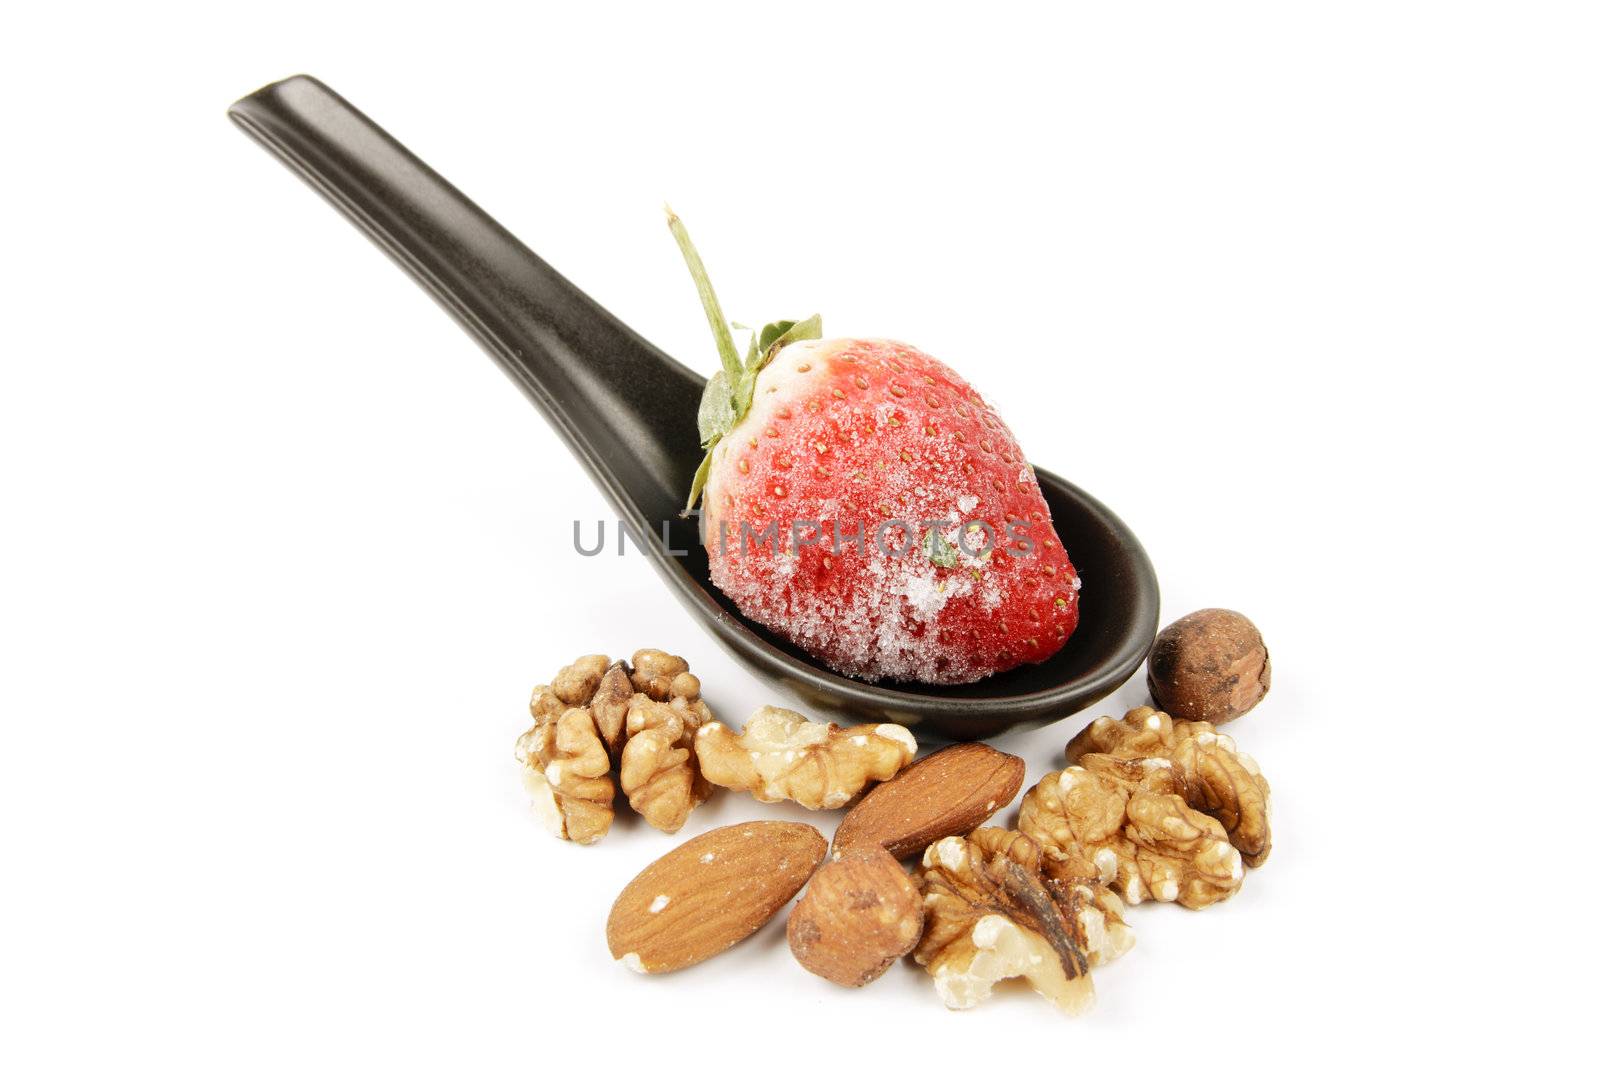 Frozen Strawberry on a Spoon by KeithWilson